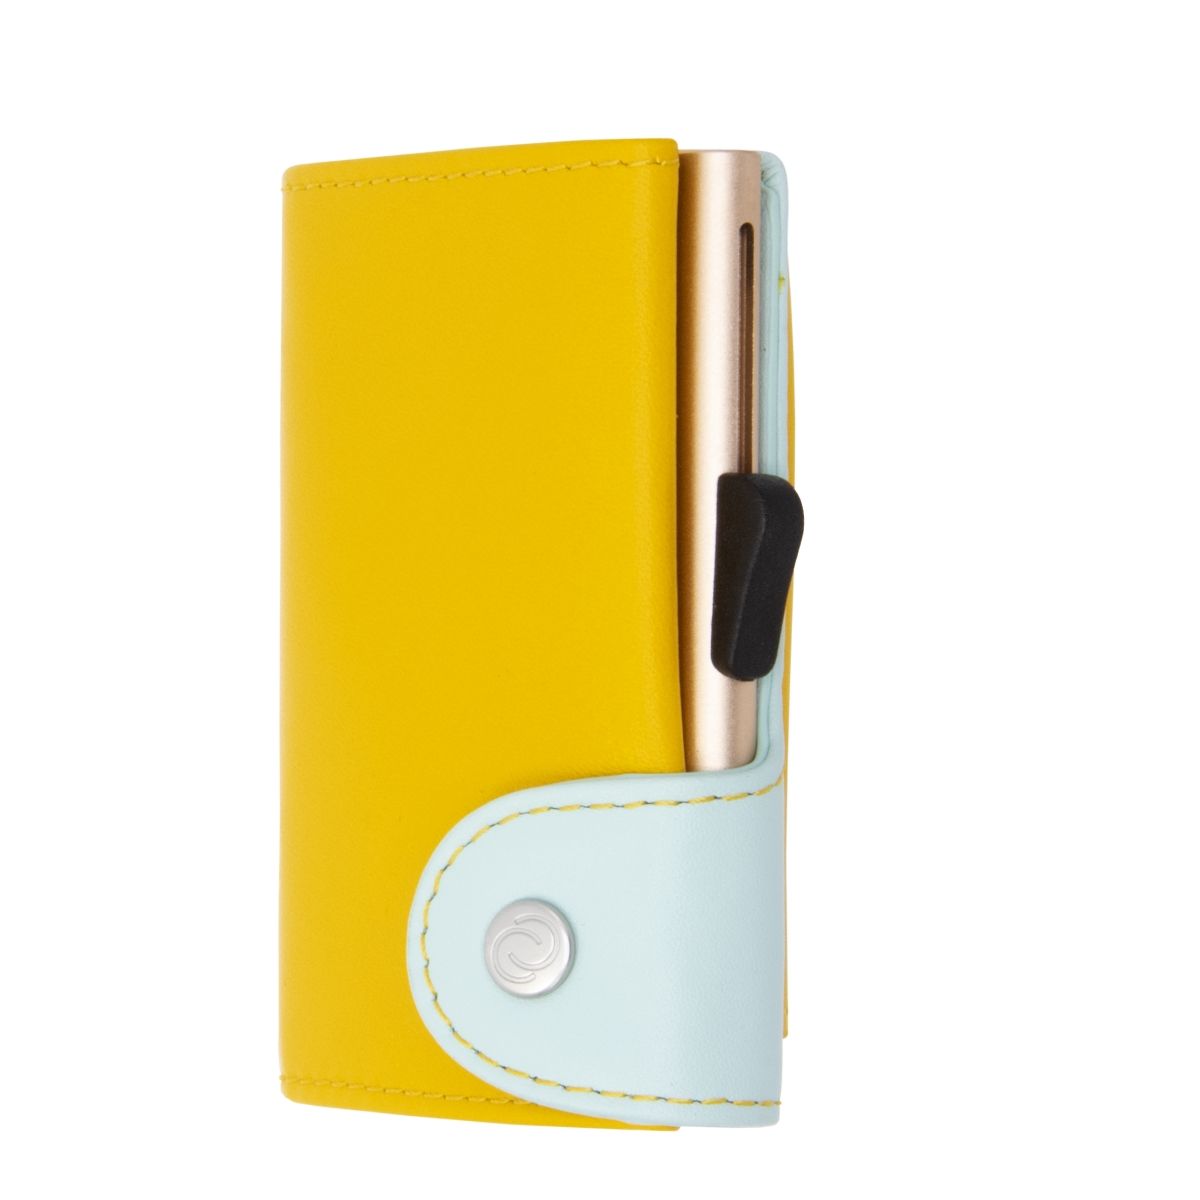 C-Secure Aluminum Card Holder with Genuine Leather and Coin Pouch - Saffron/Aqua